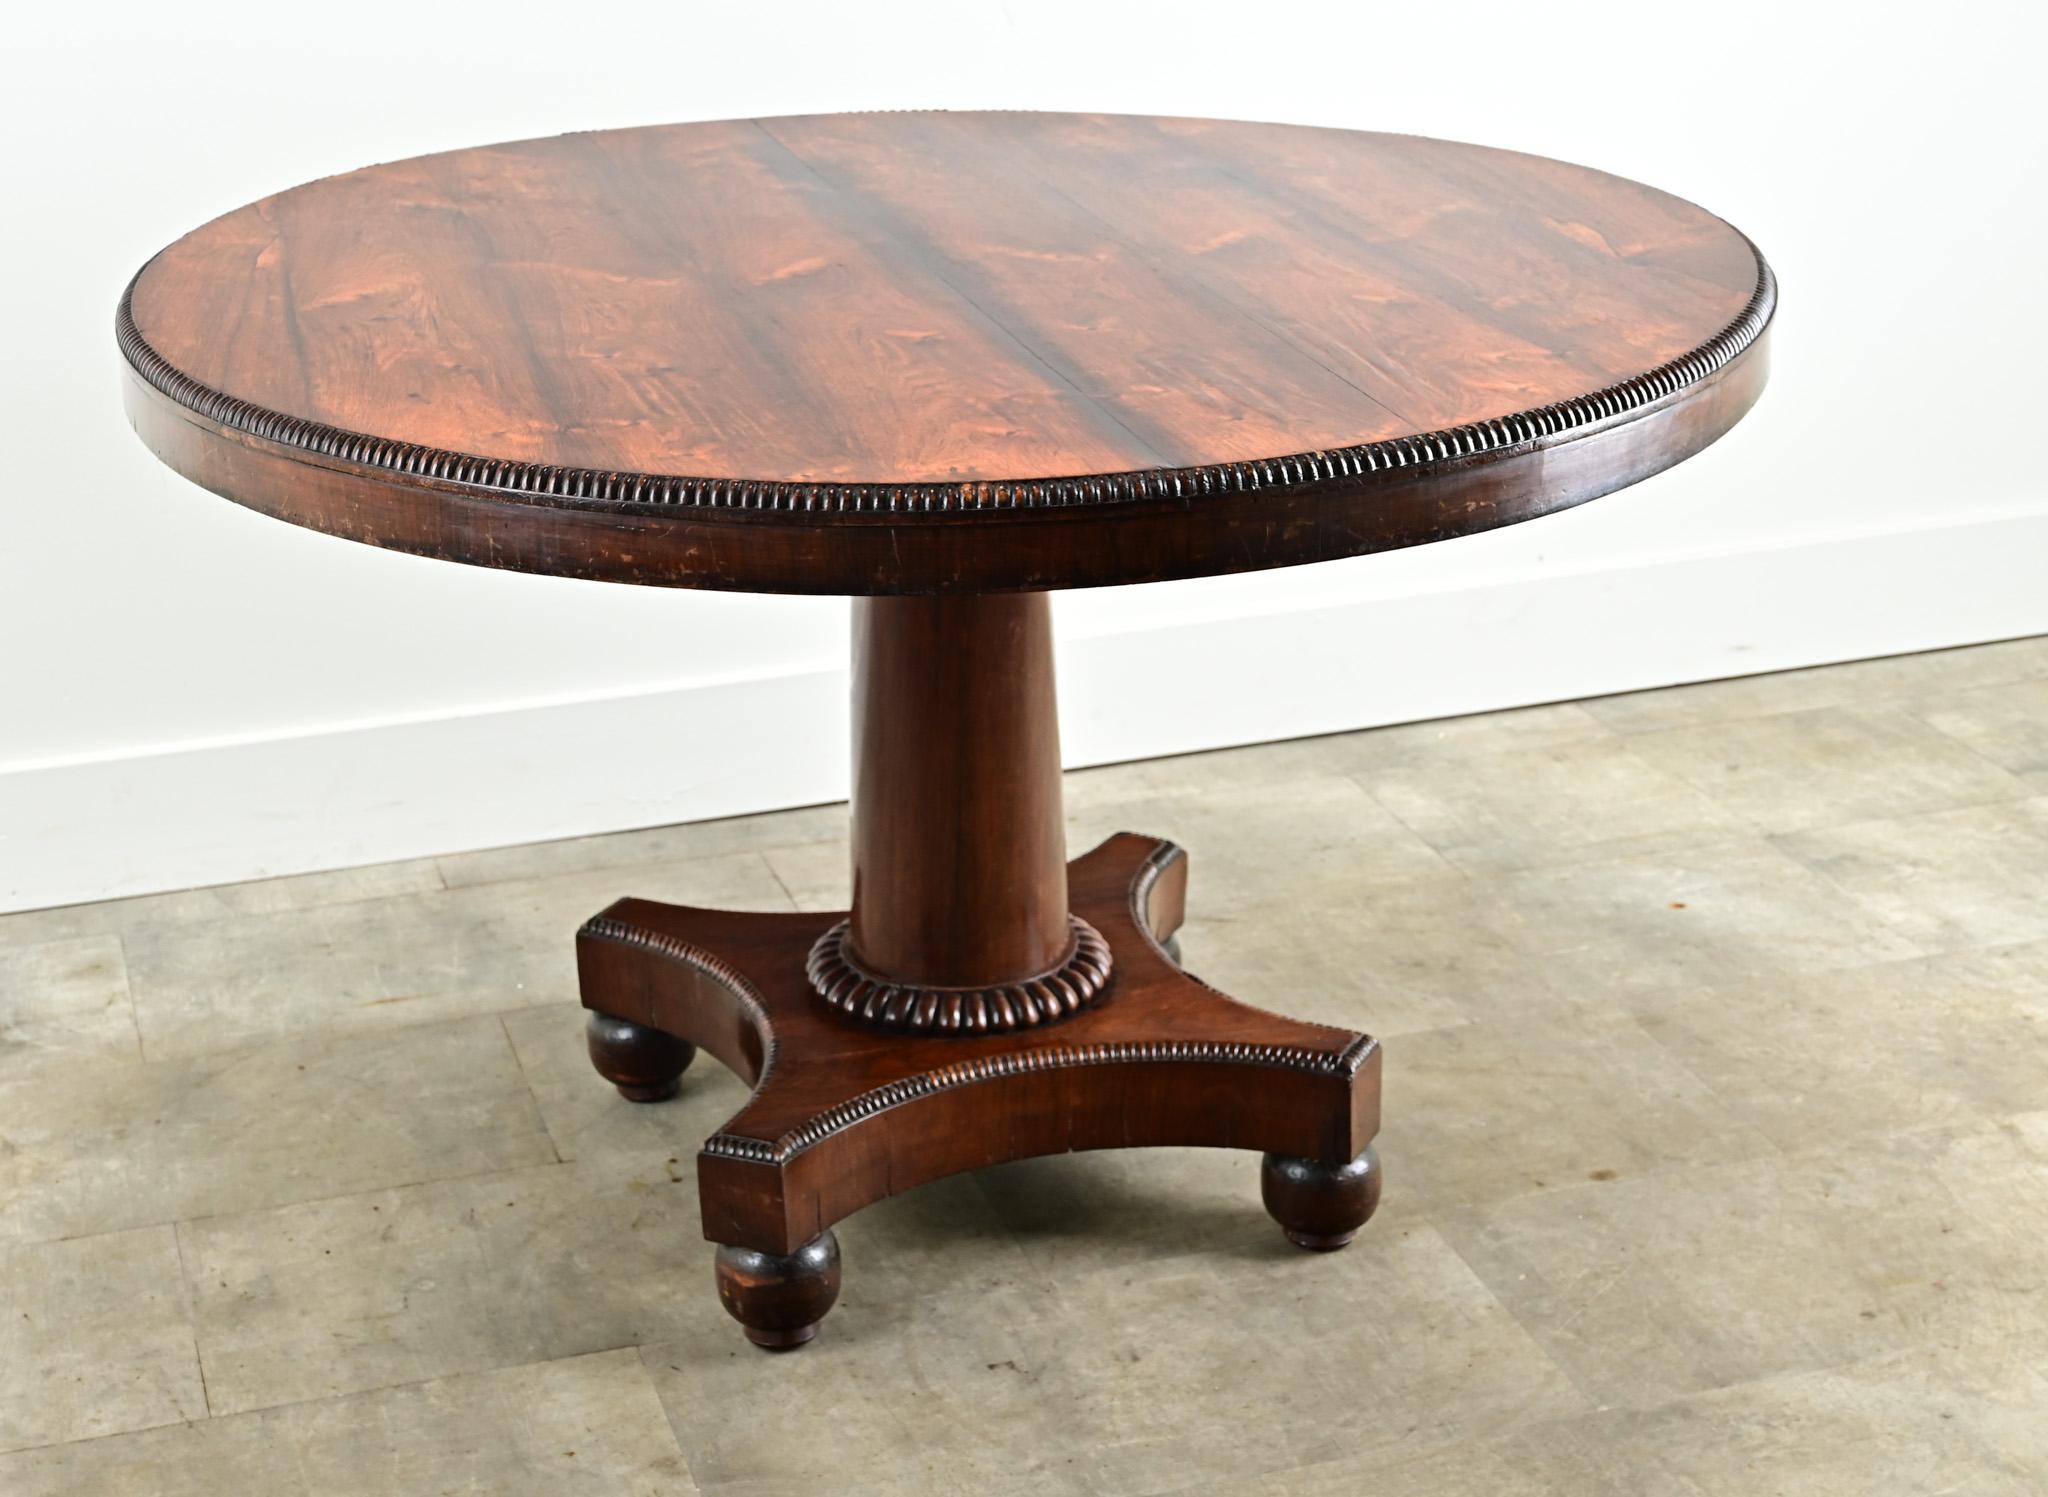 The perfect round dining table to comfortably seat four people. This dutch table is made of beautifully figured rosewood with a carved beaded banding. The pedestal base has a simple, rounded center style over a shaped, concave plinth base lifted on